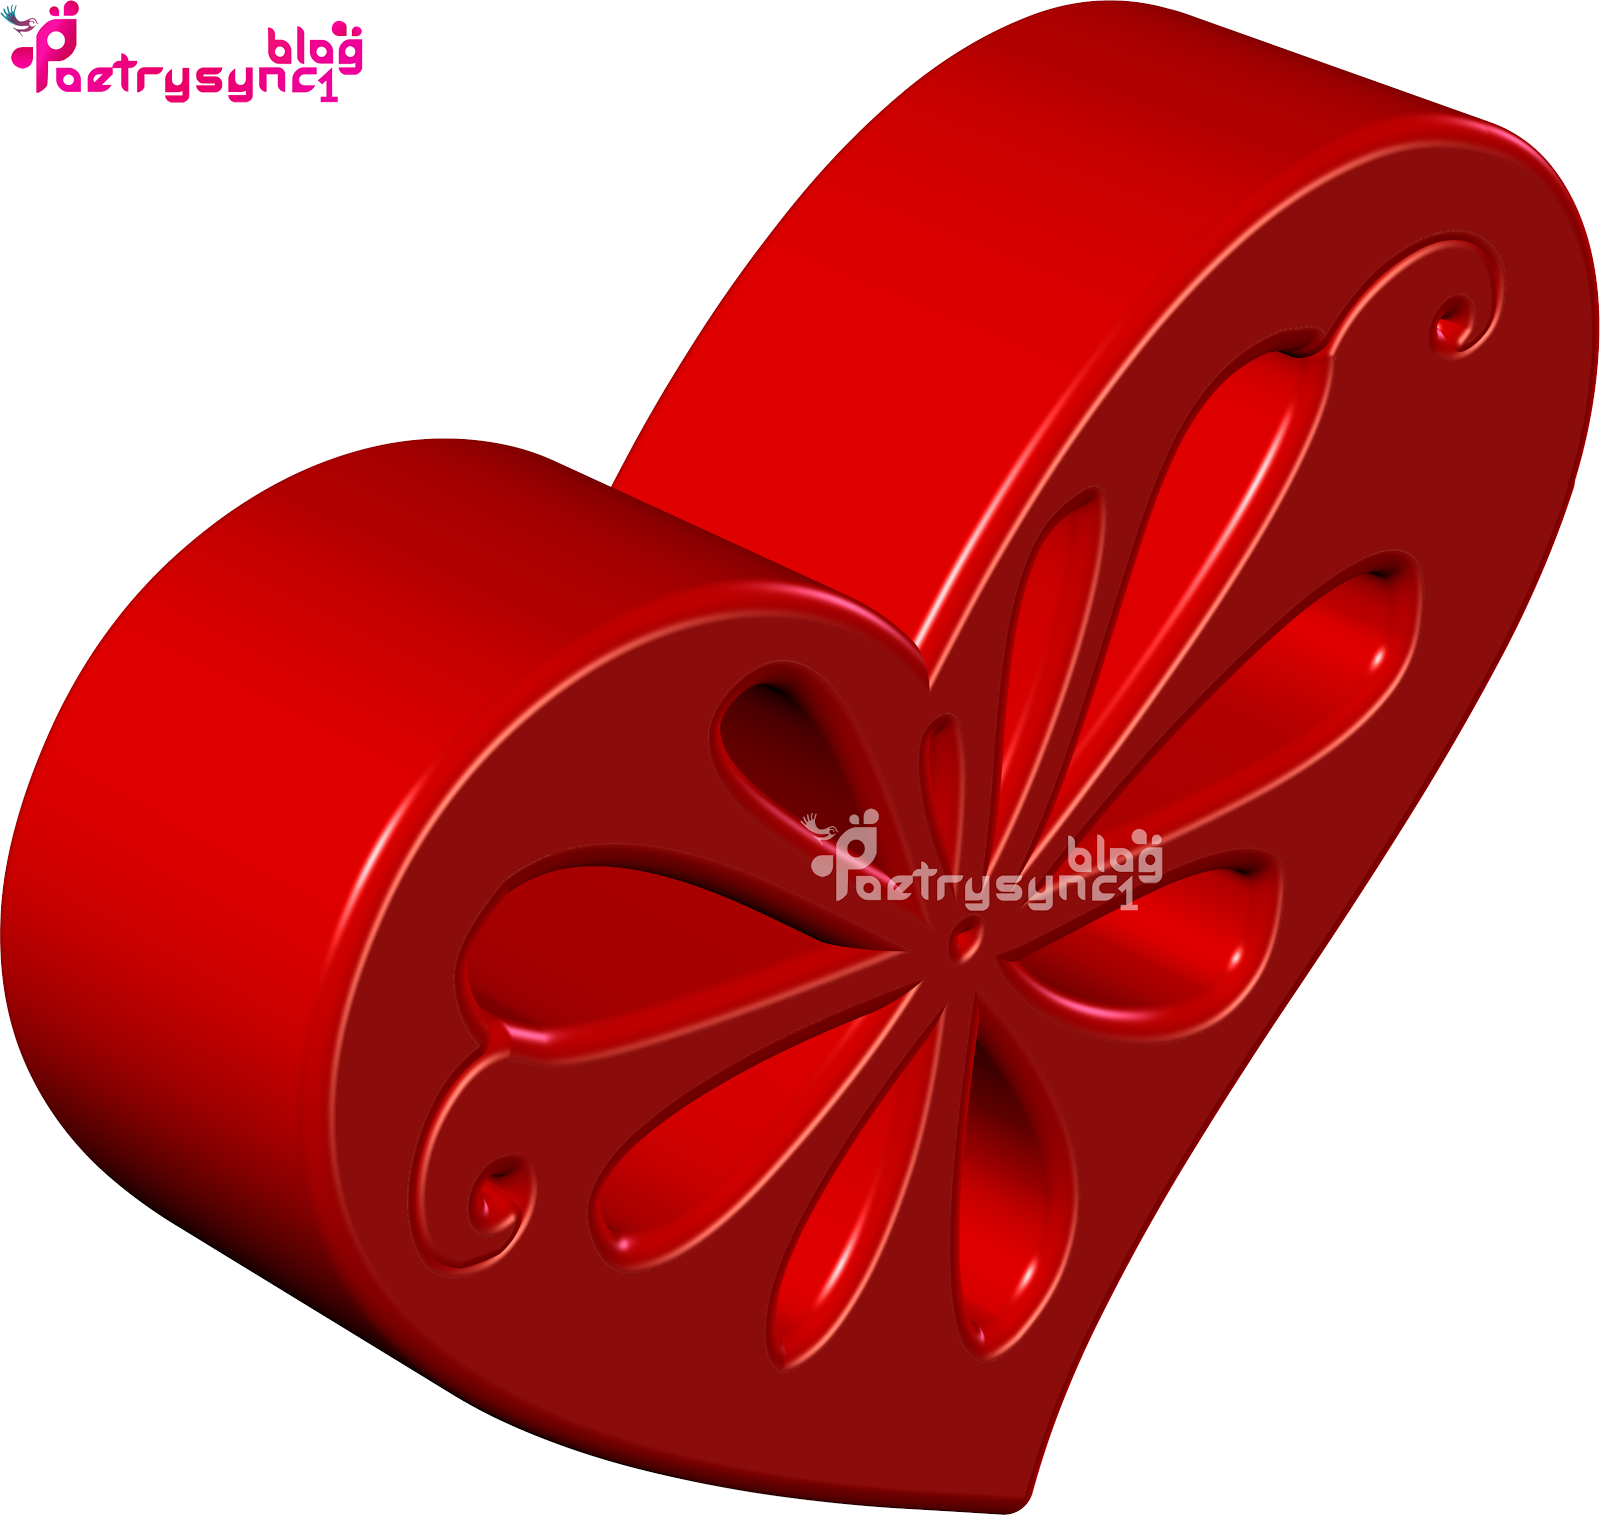 Love-3D-Heart-Image-Wallpaper-In-Red-Colour-By-Poetrysync1.blog